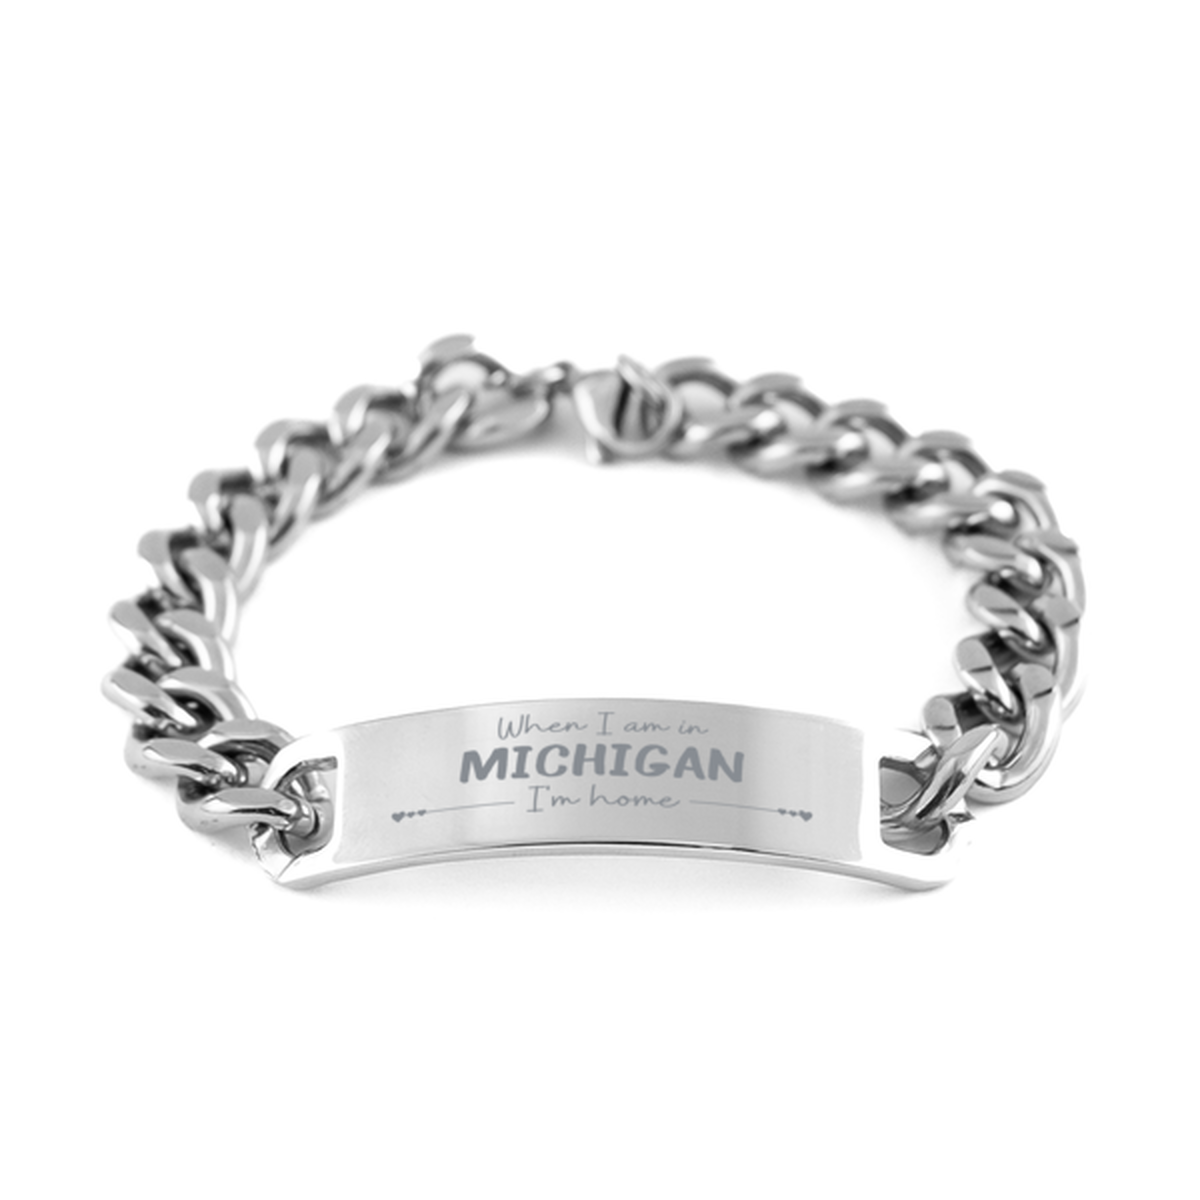 When I am in Michigan I'm home Cuban Chain Stainless Steel Bracelet, Cheap Gifts For Michigan, State Michigan Birthday Gifts for Friends Coworker